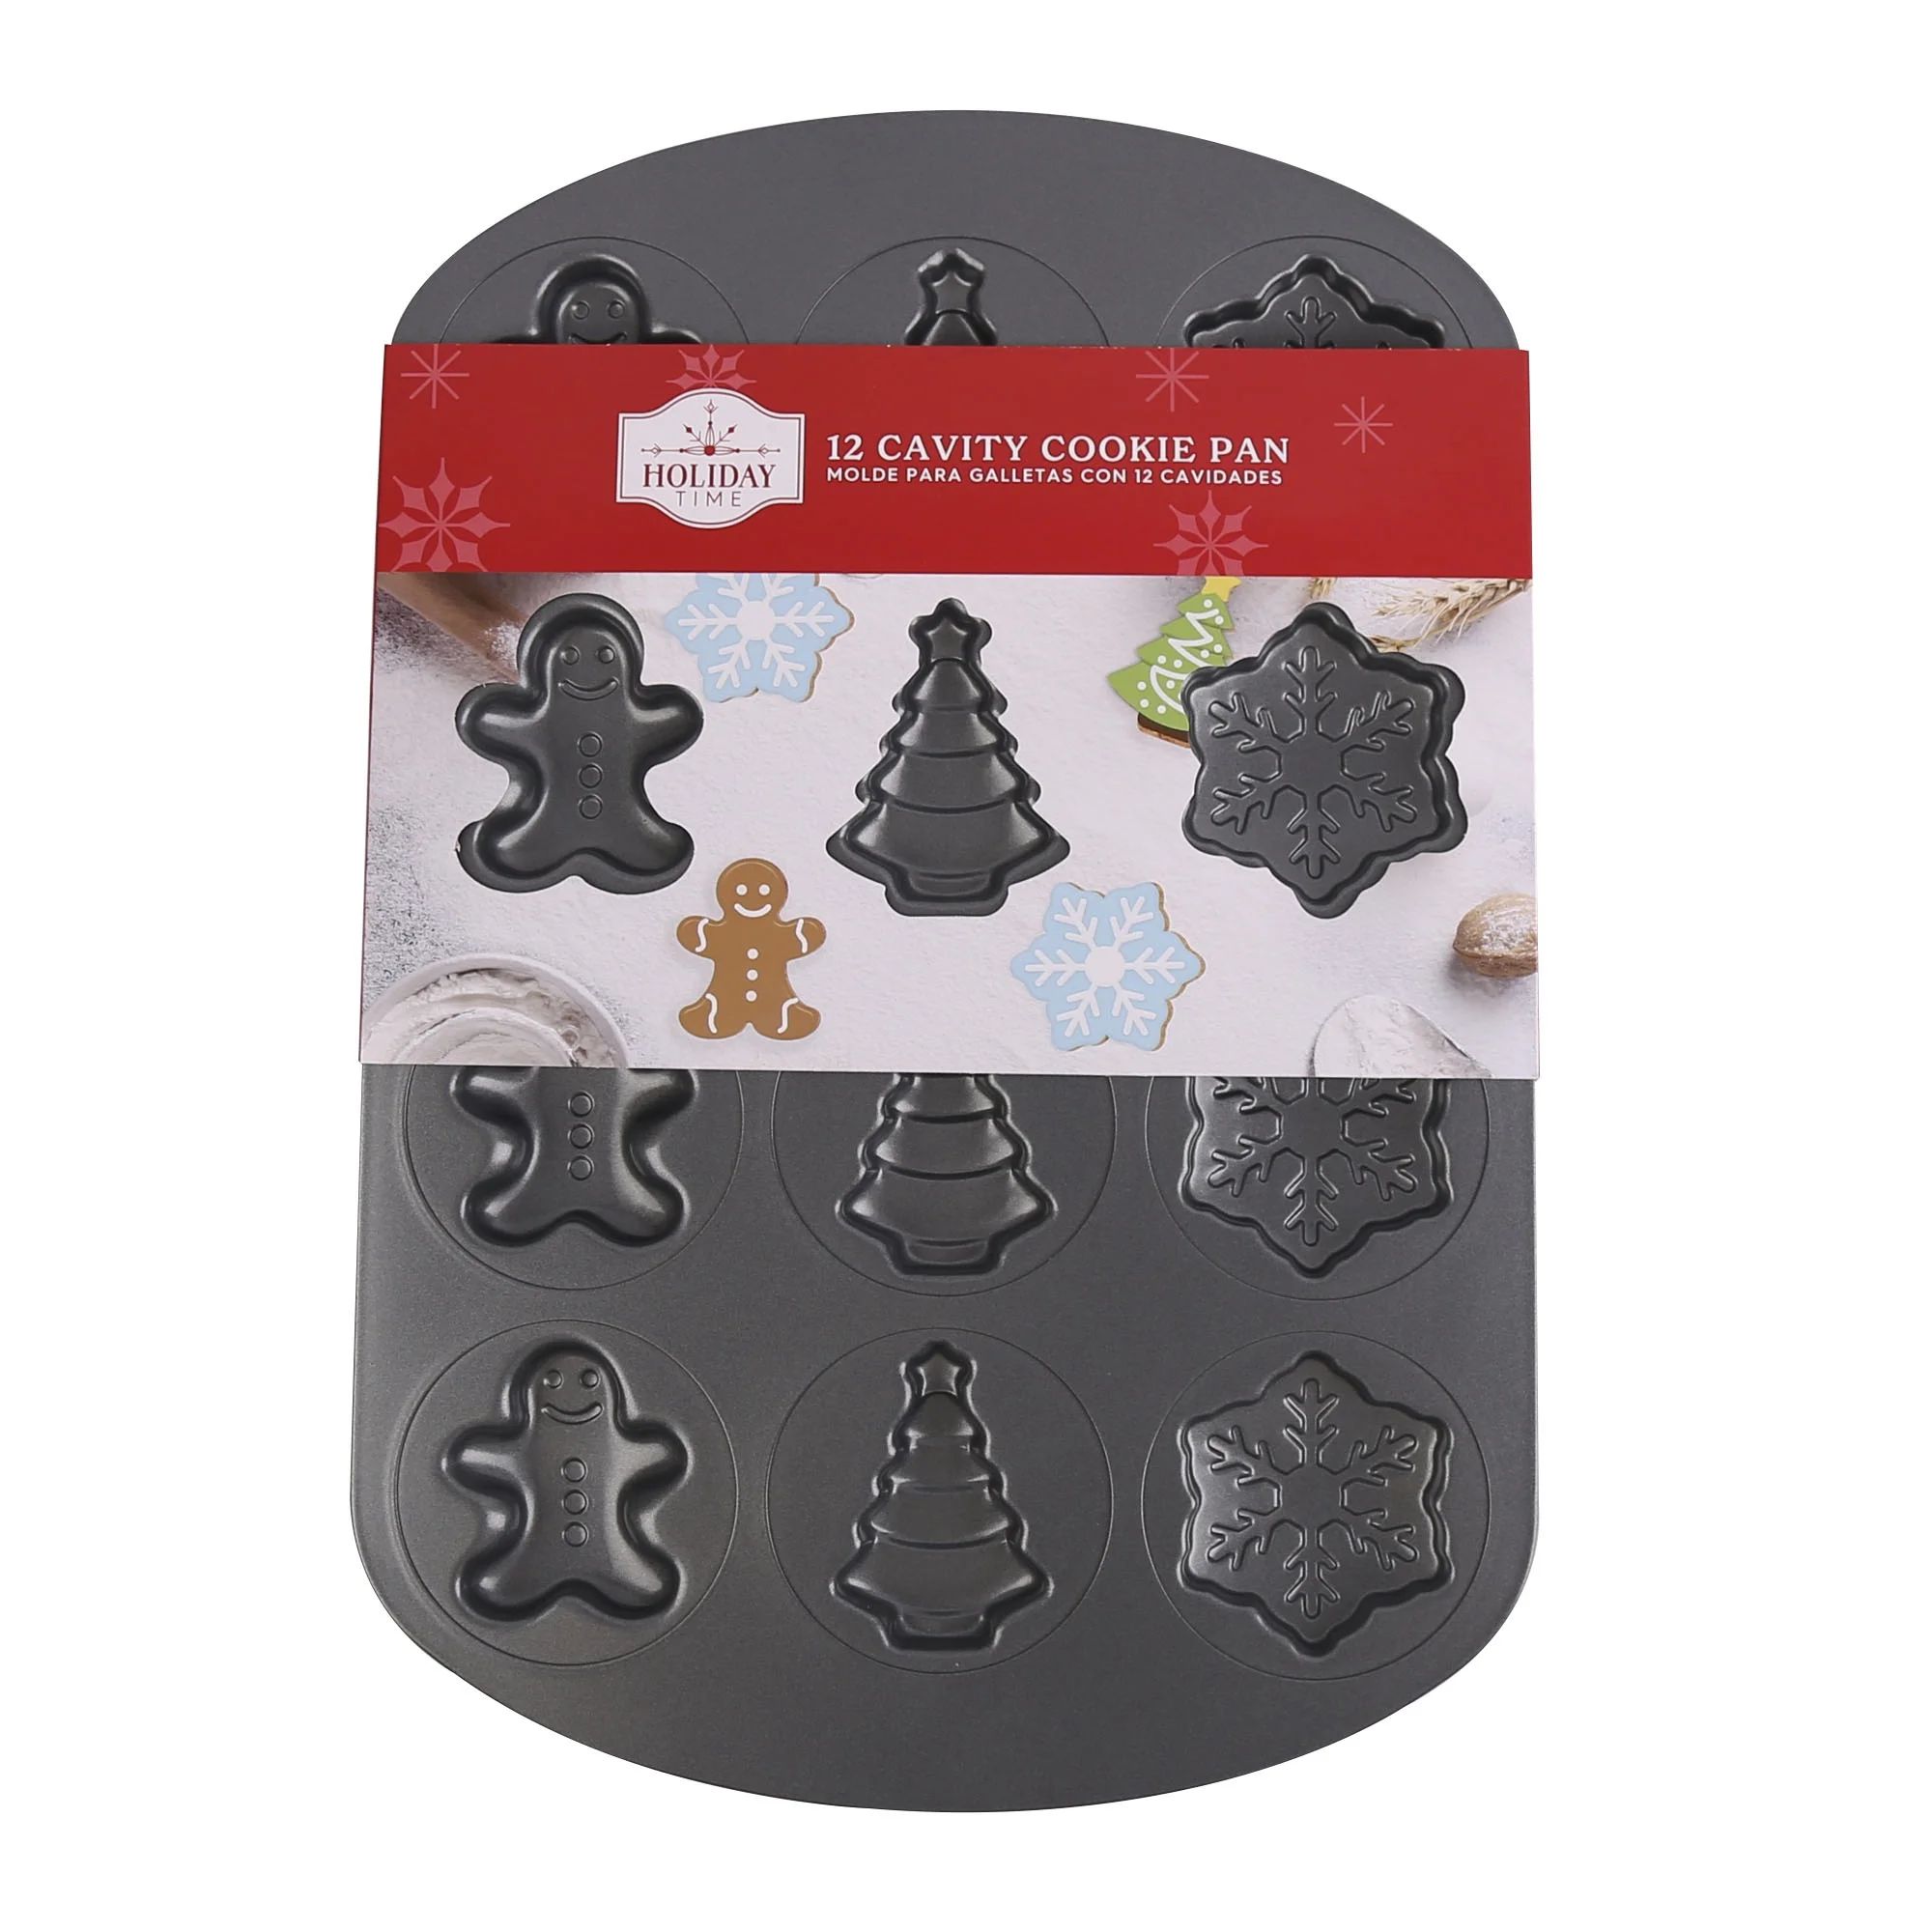 Holiday Time Christmas Non-Stick 12 Cavity Cookie Pan, 11.2 X 16.54 inches, Carbon Steel | Walmart (US)